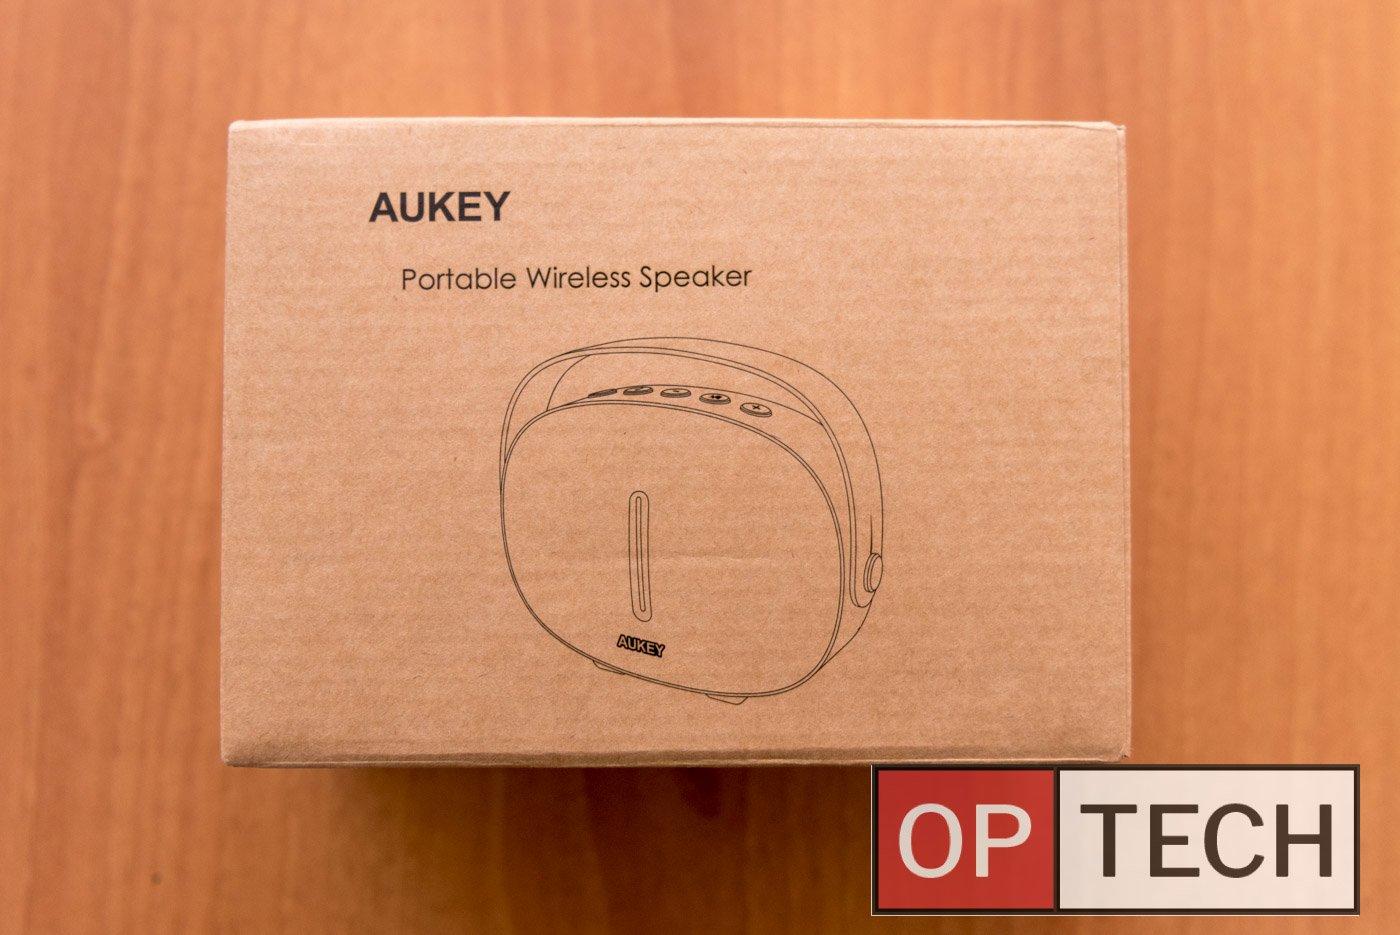 AUKEY SK-S2 unboxing